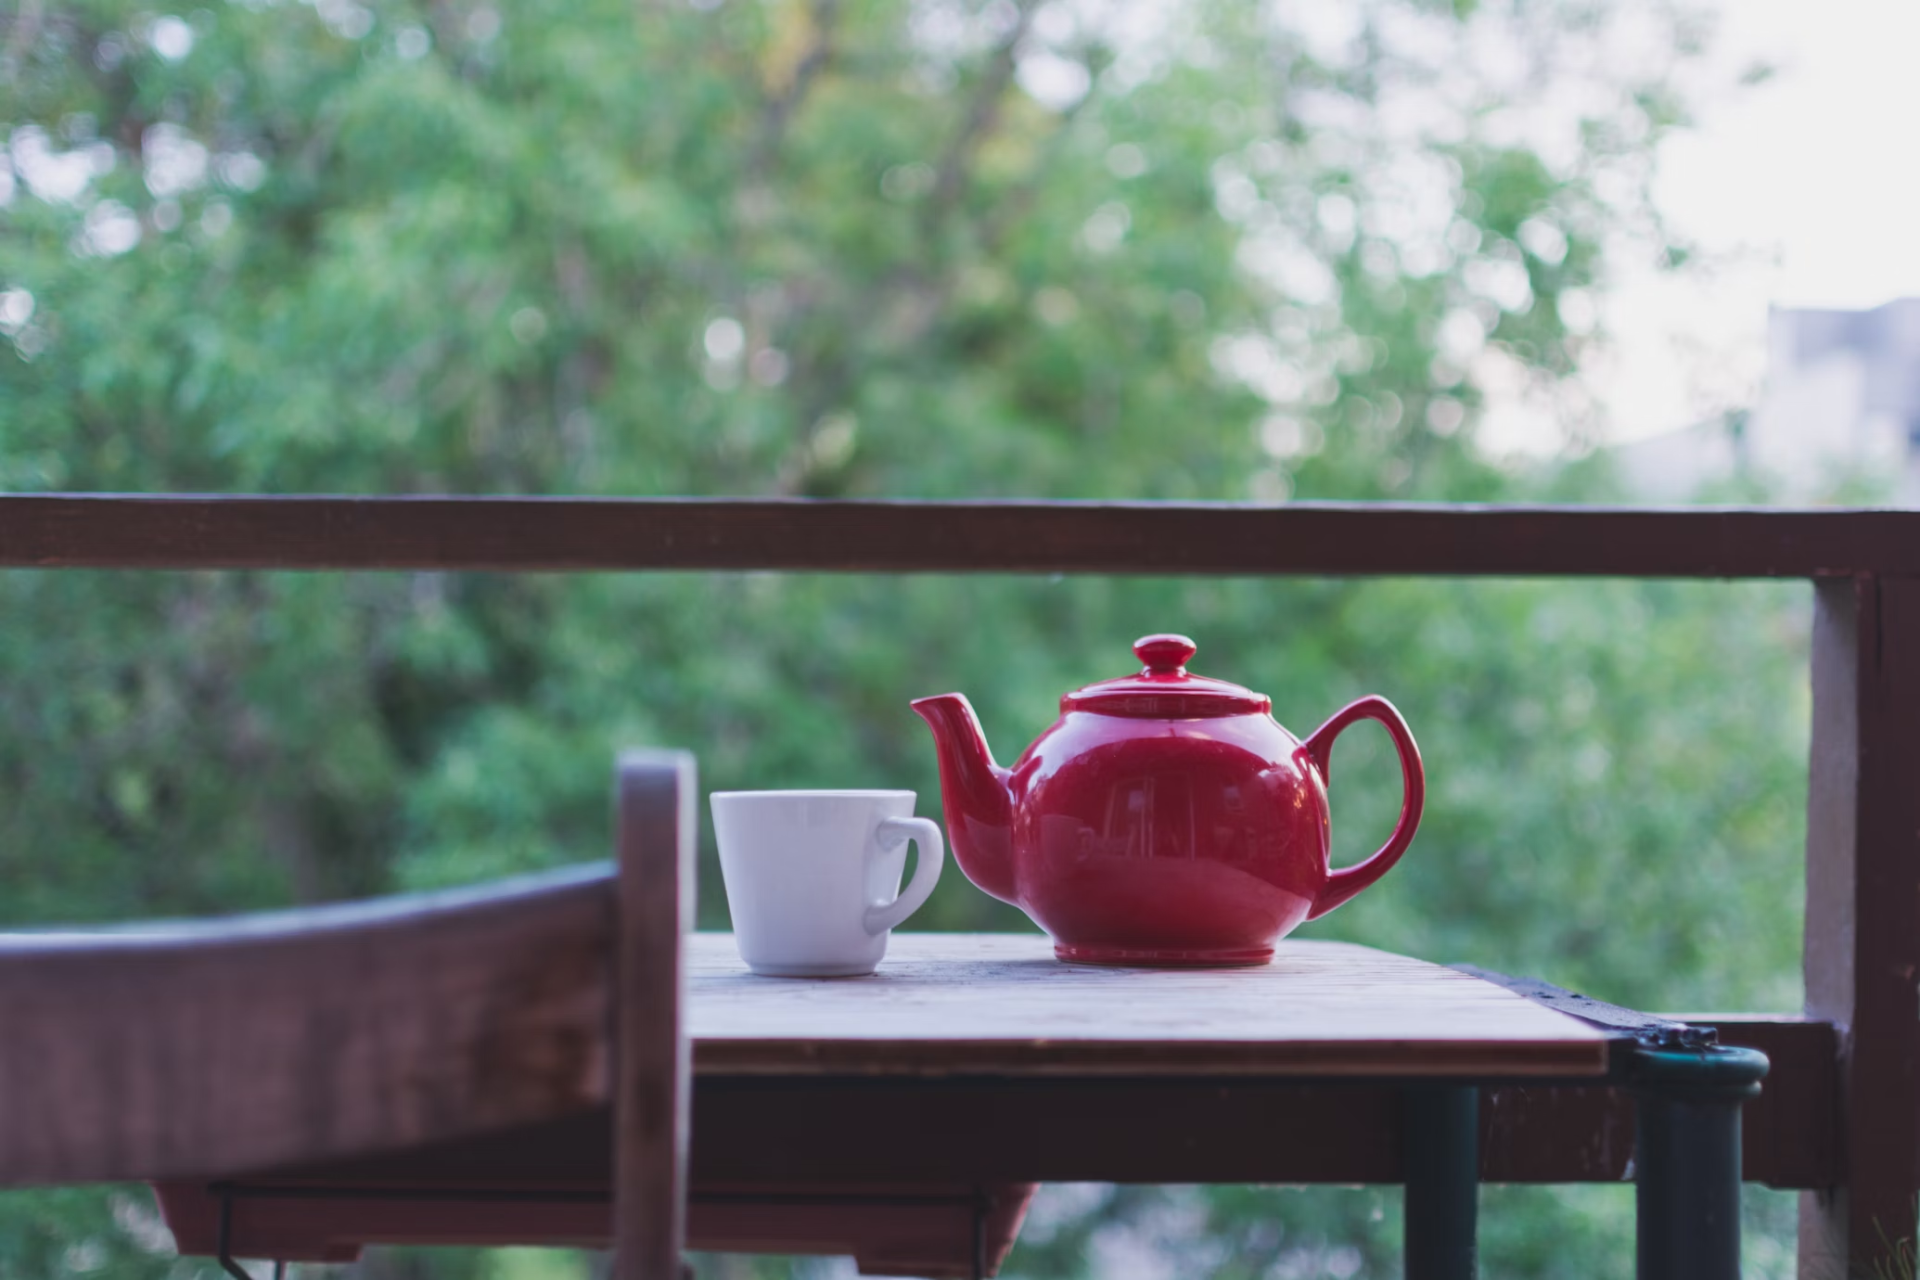 Red teapot on table with white cup. Greenery in the background